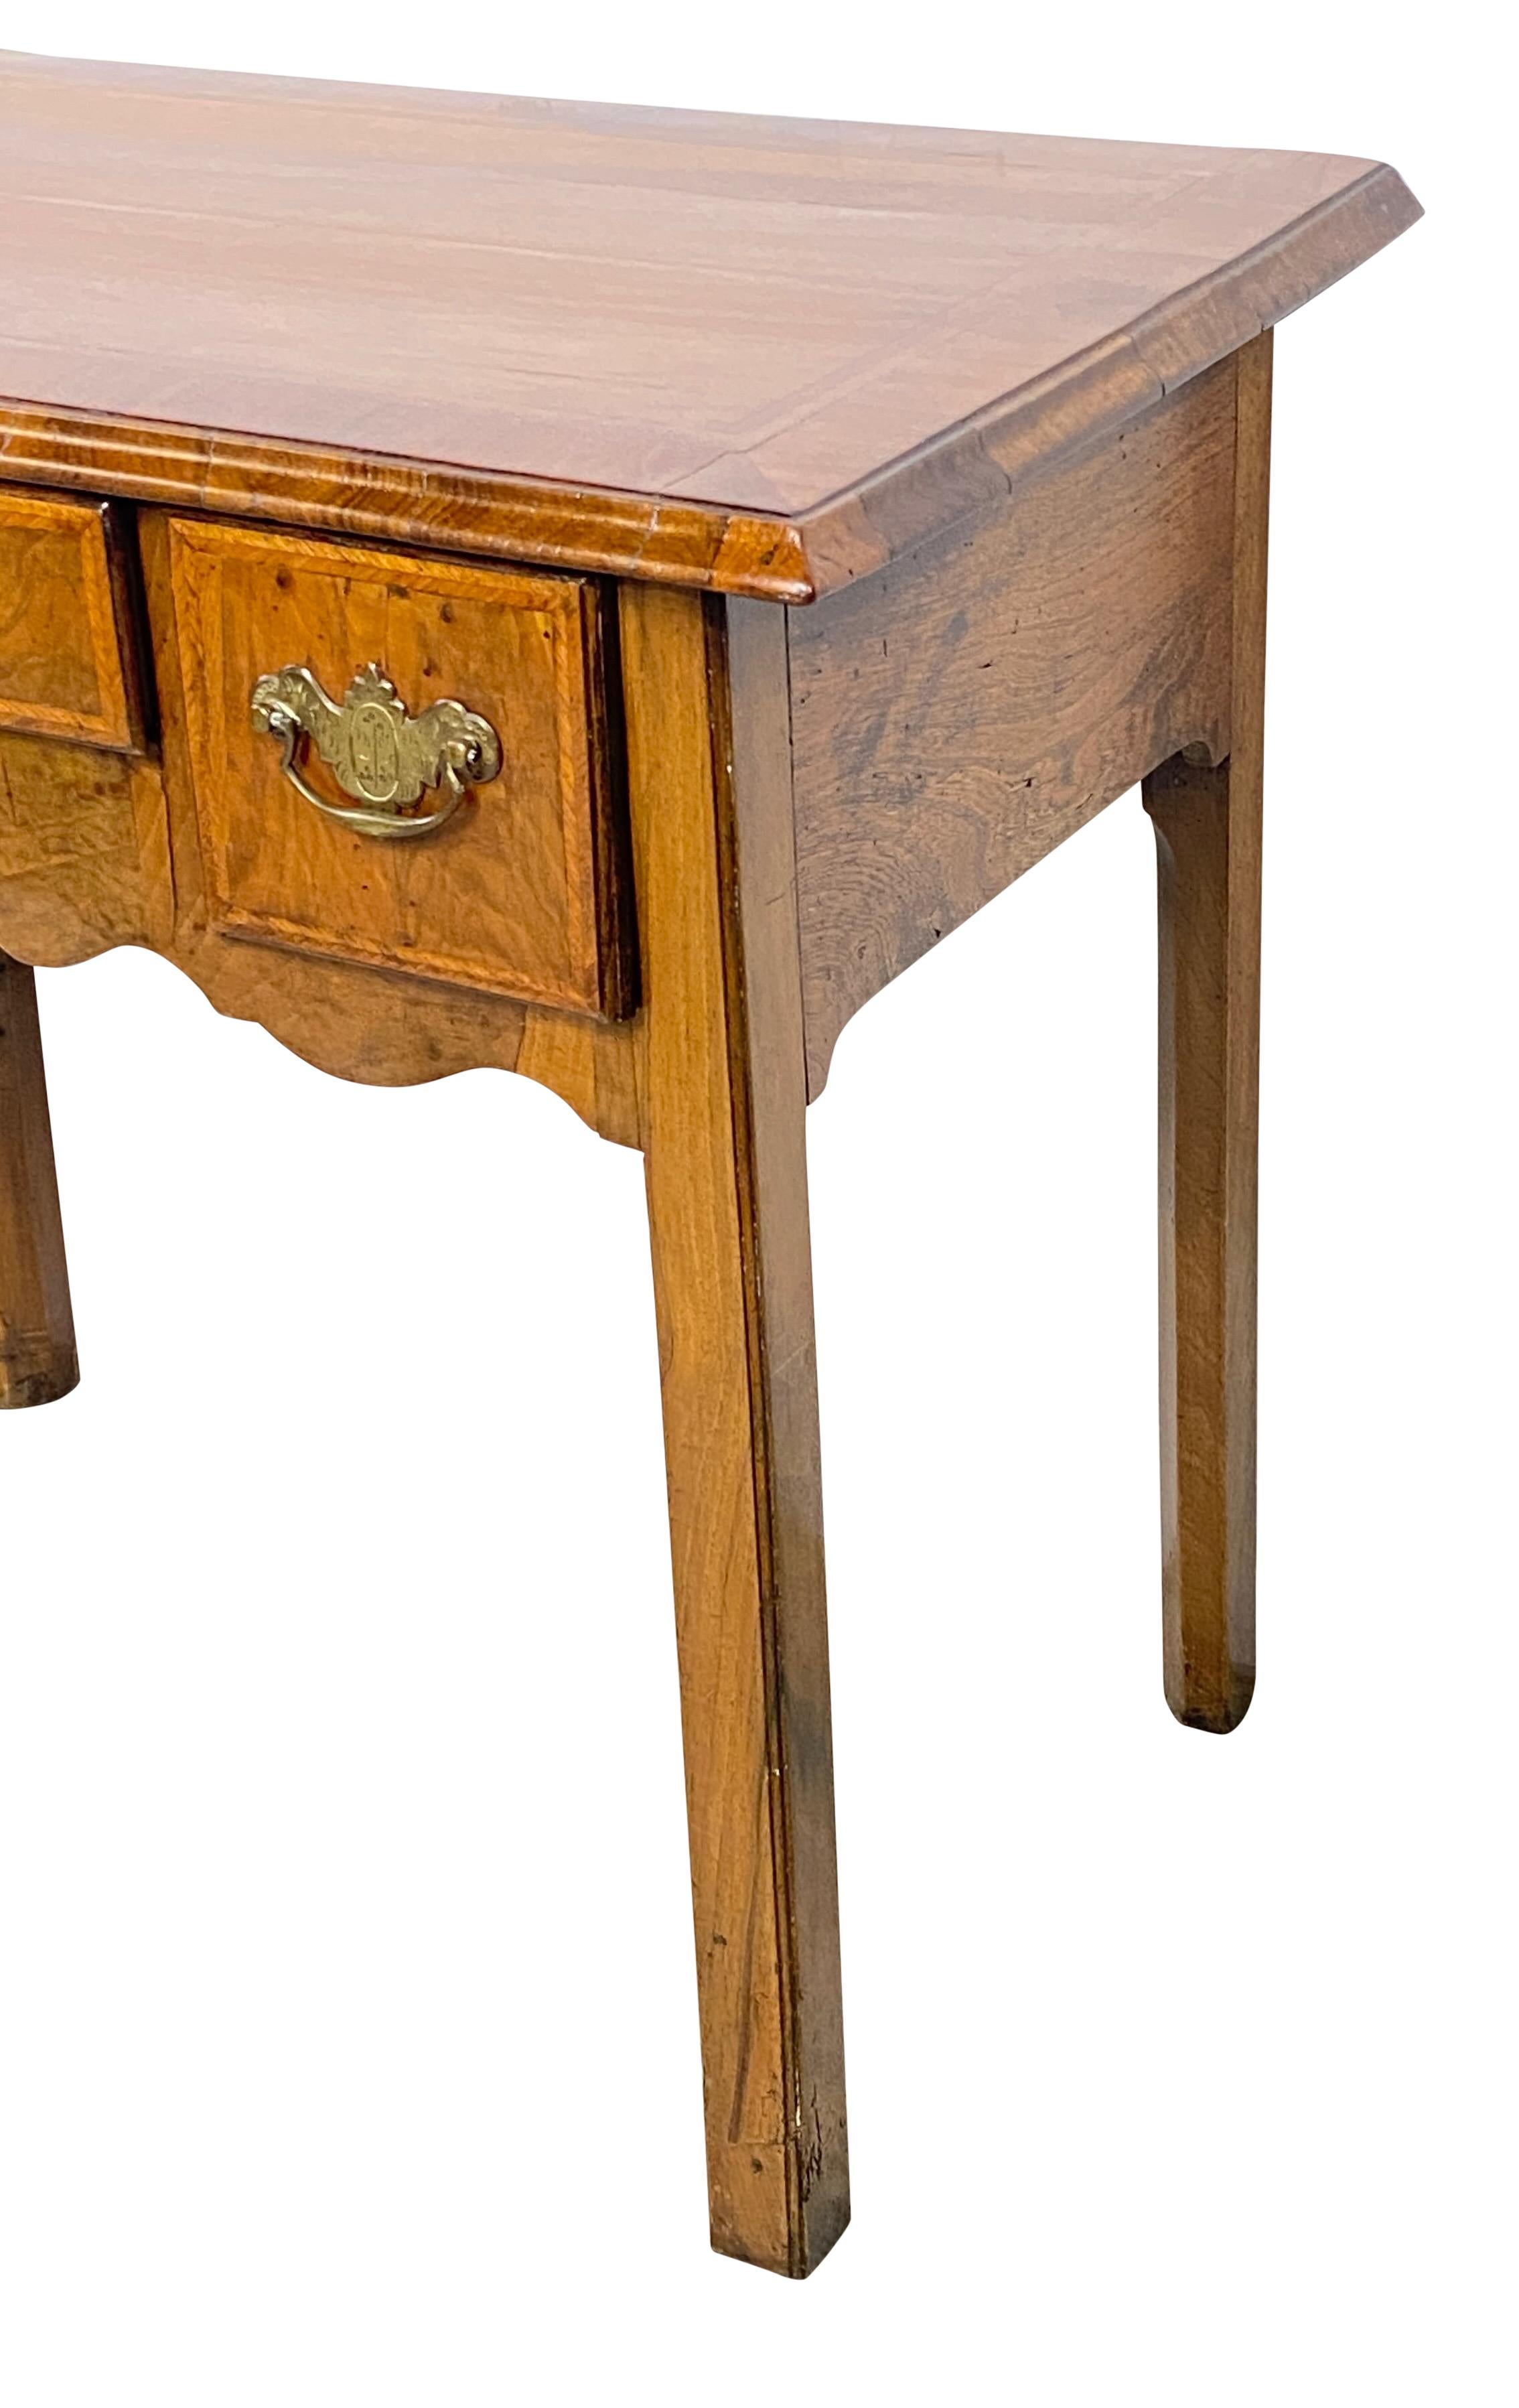 18th Century English Walnut Writing Table Desk / Dressing Table In Good Condition For Sale In San Francisco, CA